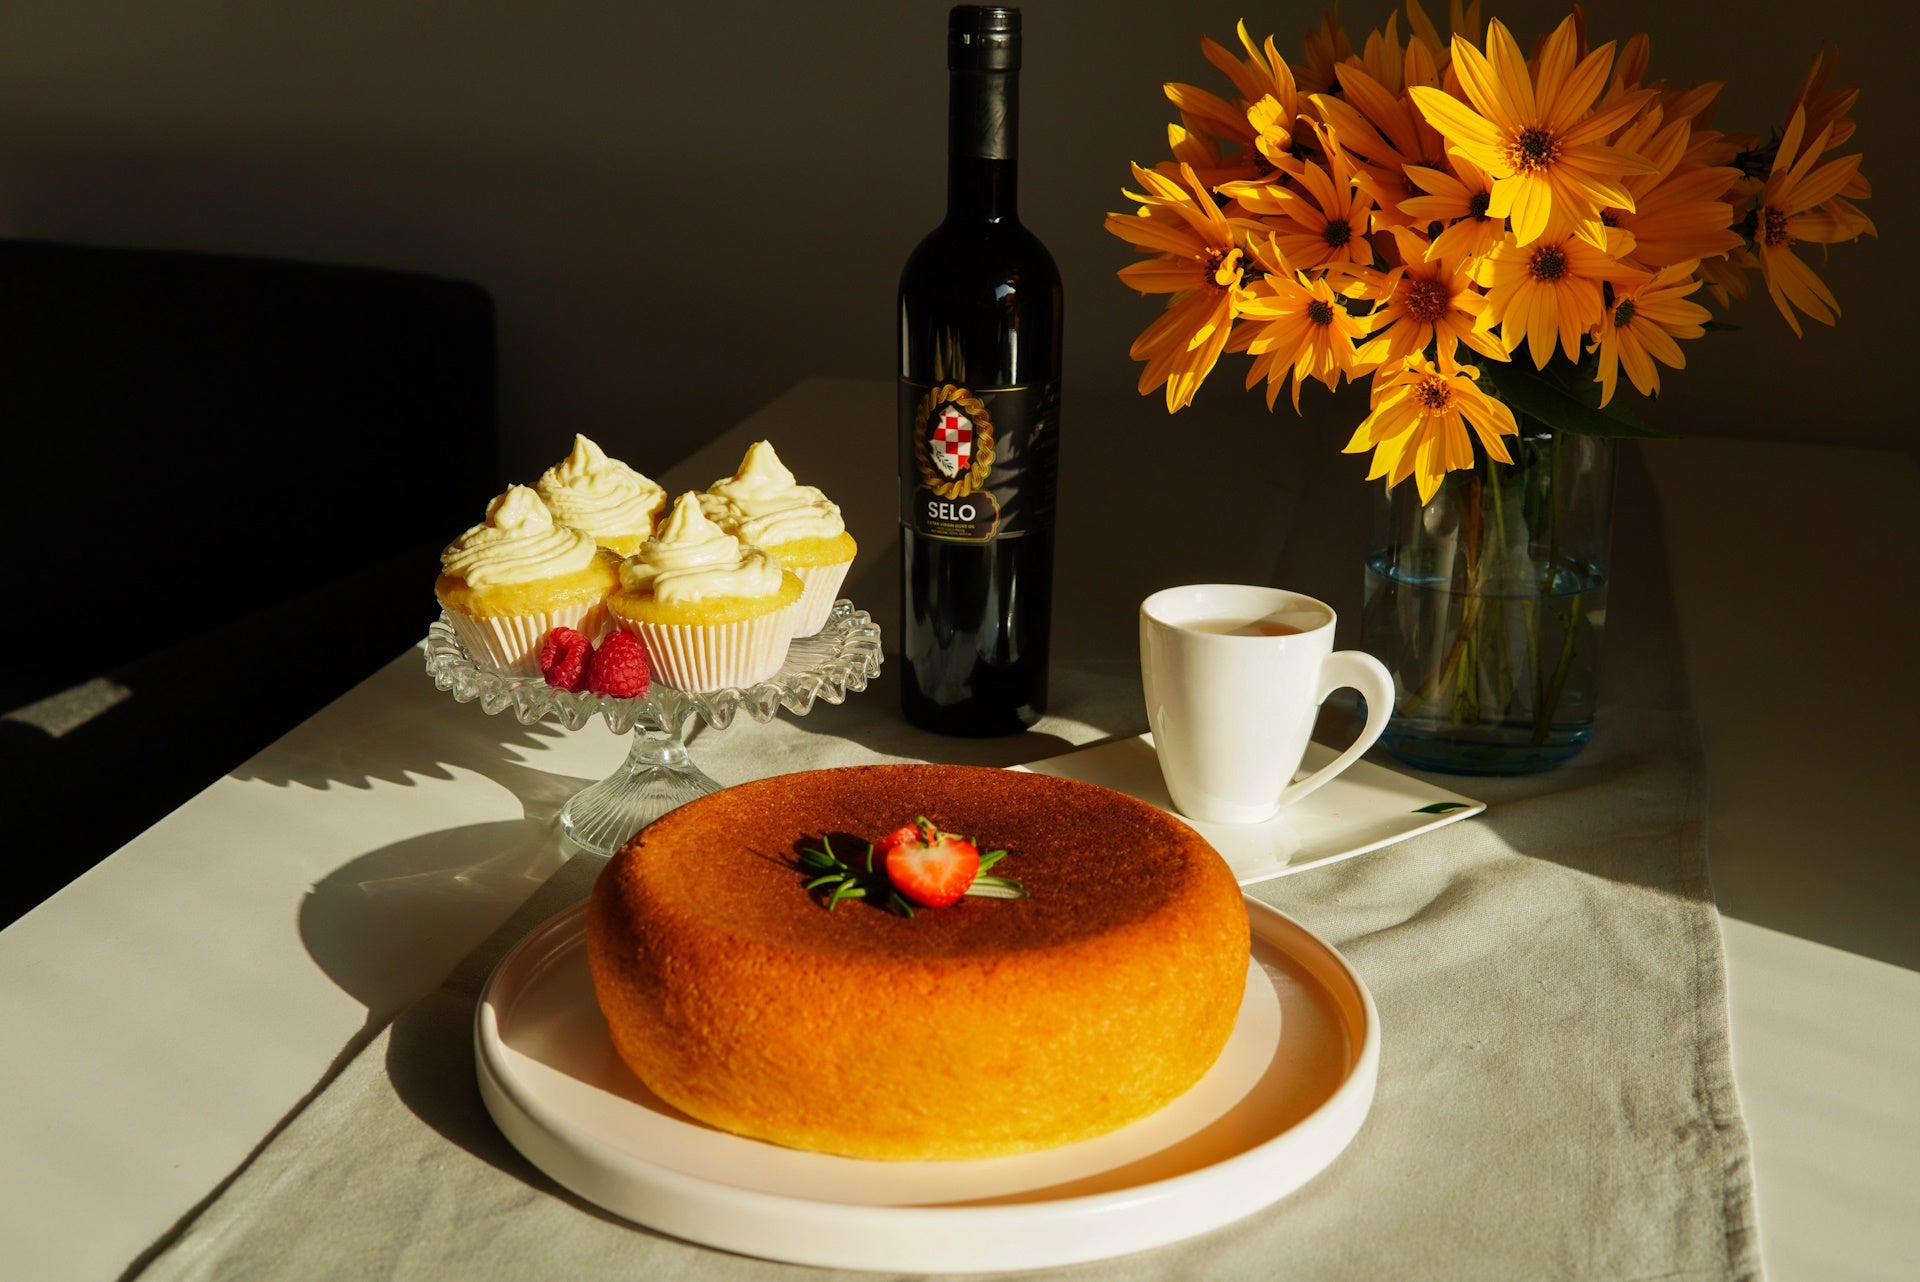 Sumptuous shortcake adorned with cupcakes and a bottle of Selo olive oil, a sweet and savory indulgence.